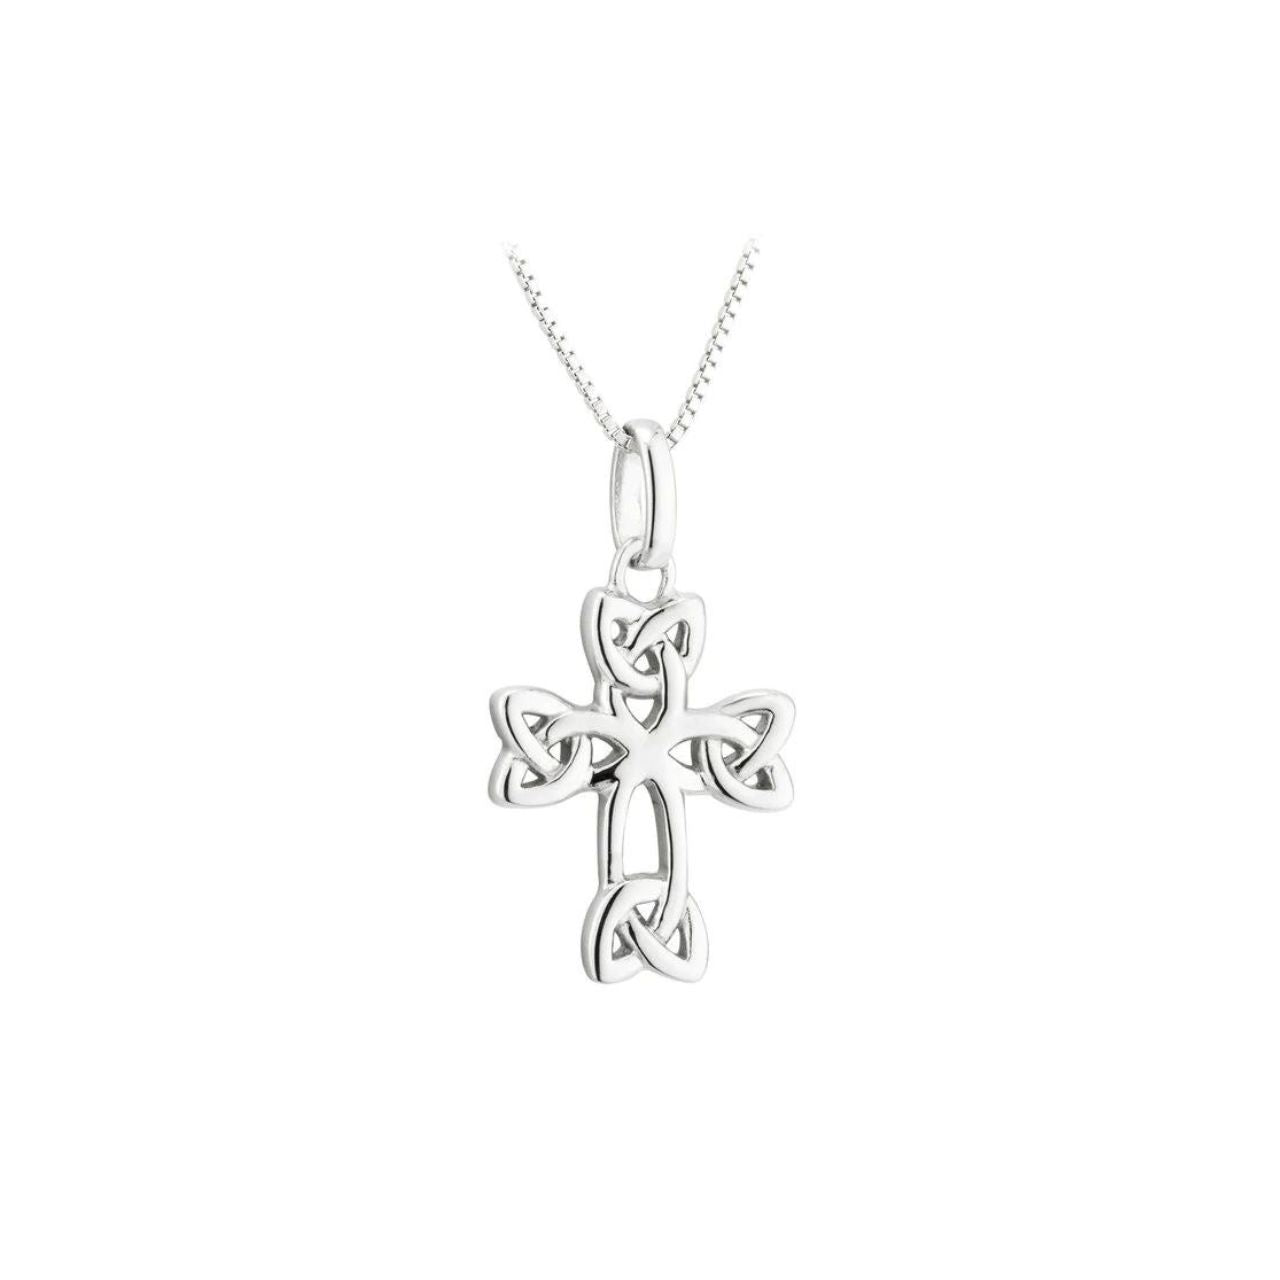 Expertly crafted by Solvar, this Sterling Silver Celtic Cross Necklace is a stunning addition to any jewellery collection. Made with high-quality sterling silver, it features intricate Celtic designs for a unique and timeless look. Elevate your style with this beautiful and meaningful necklace.